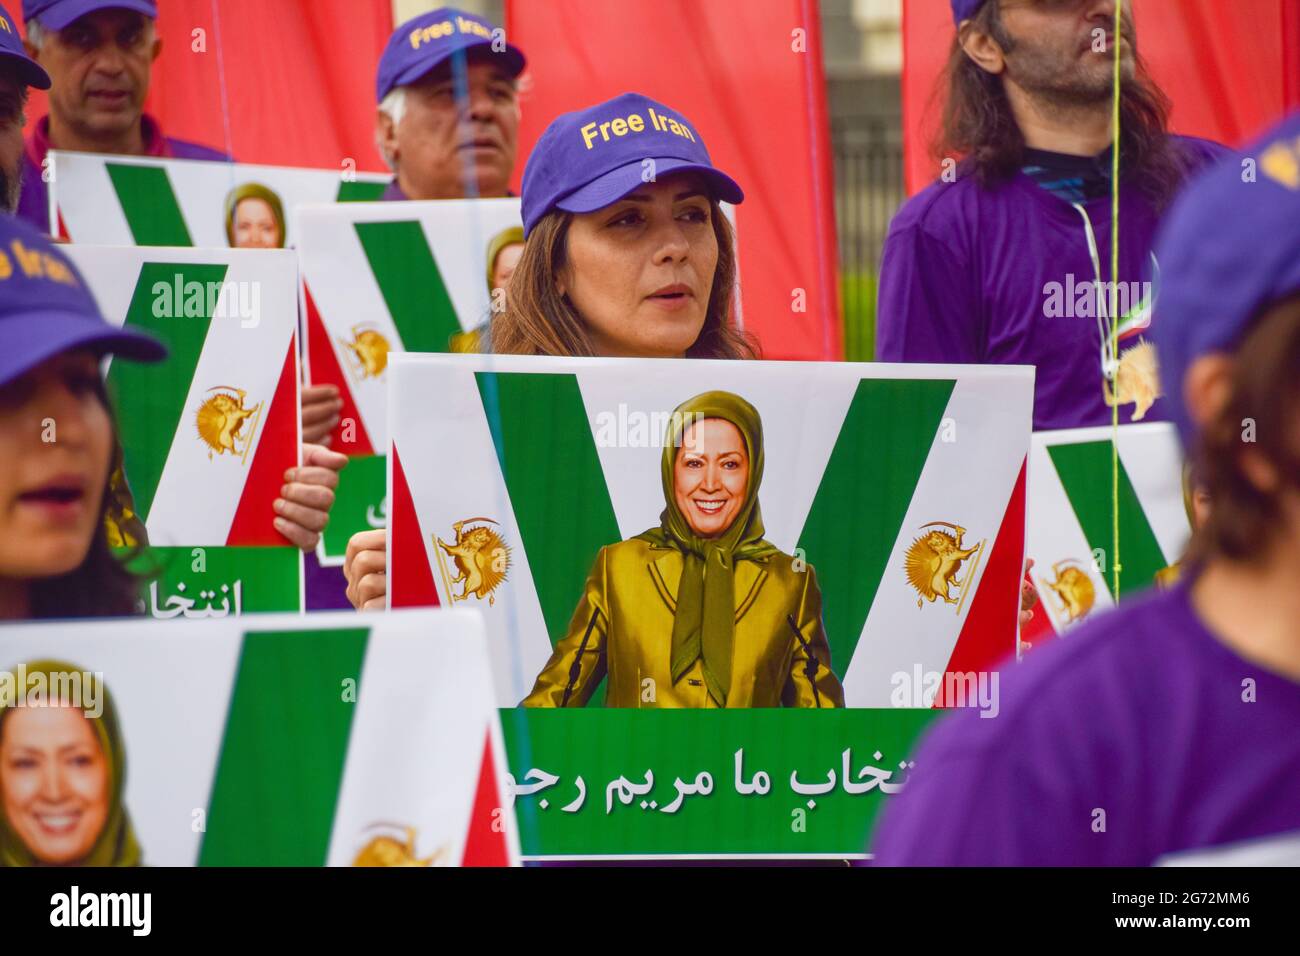 London, UK. 10th July, 2021. Protesters wearing Free Iran caps hold pictures of Maryam Rajavi during the Free Iran World Summit in London. Demonstrators gathered outside Downing Street to protest against the Iran regime and in support of Maryam Rajavi, the leader of the People's Mujahedin of Iran (MEK). Credit: SOPA Images Limited/Alamy Live News Stock Photo